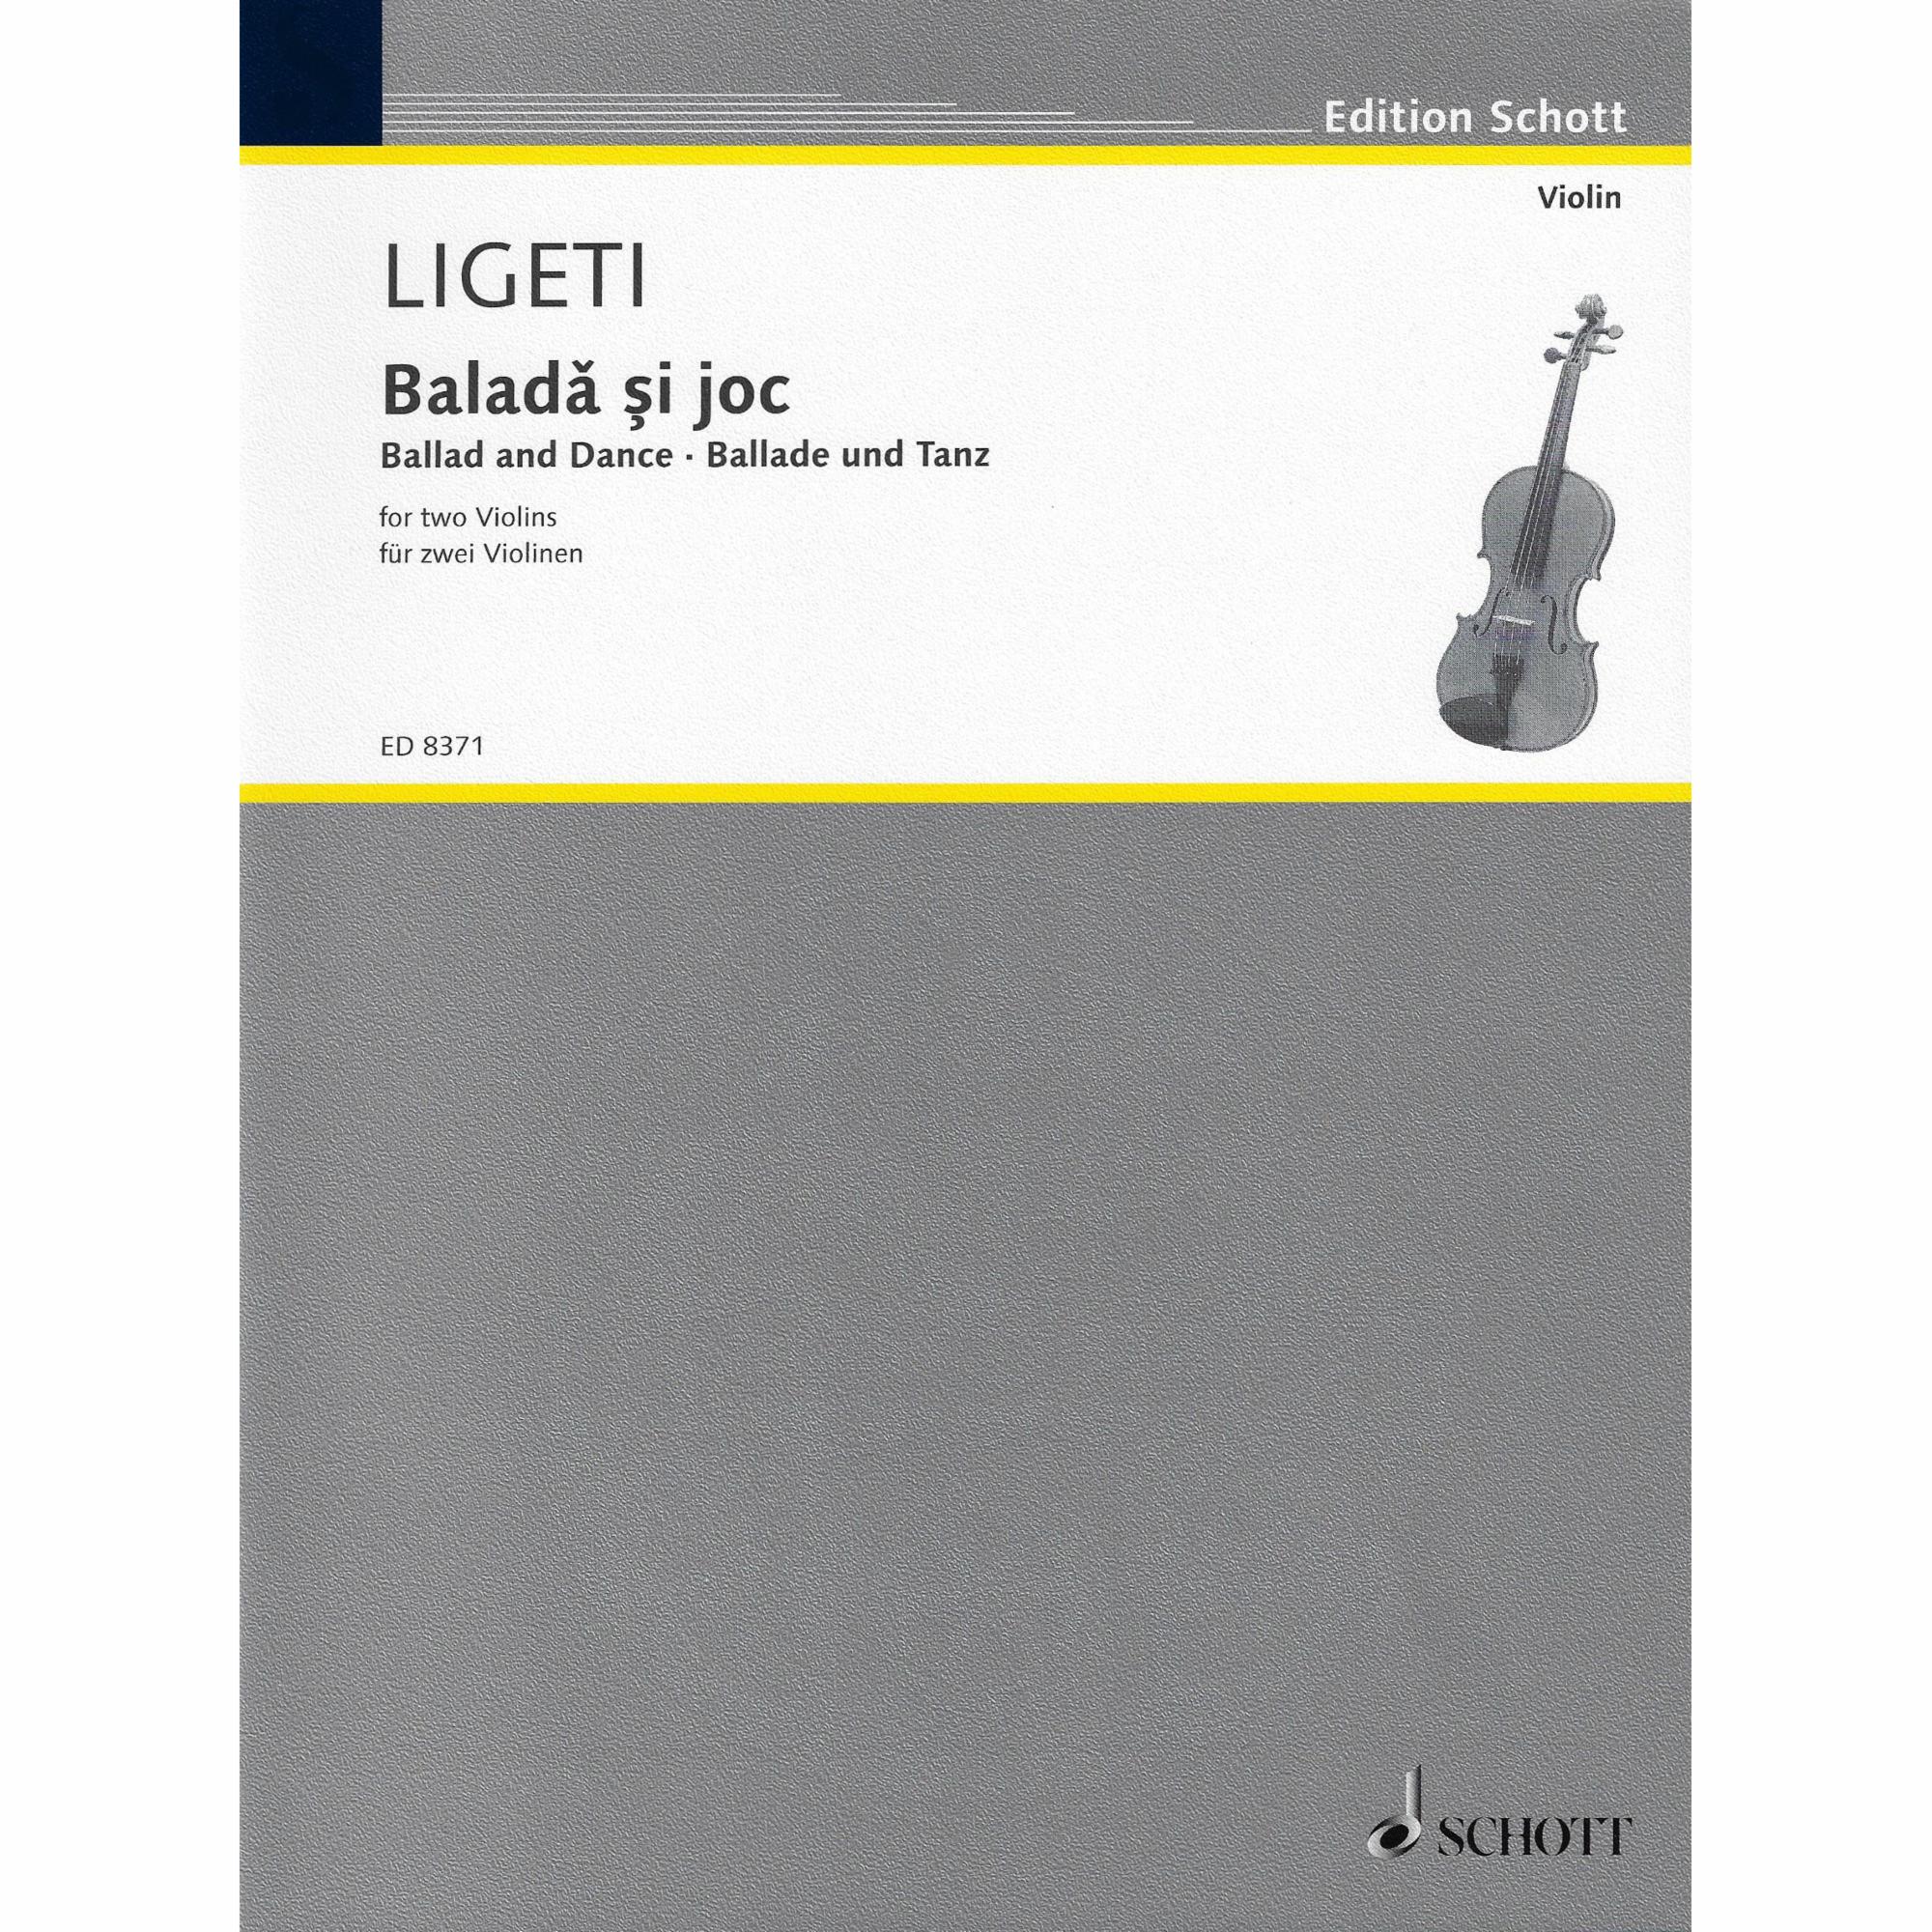 Ligeti -- Ballad and Dance for Two Violins